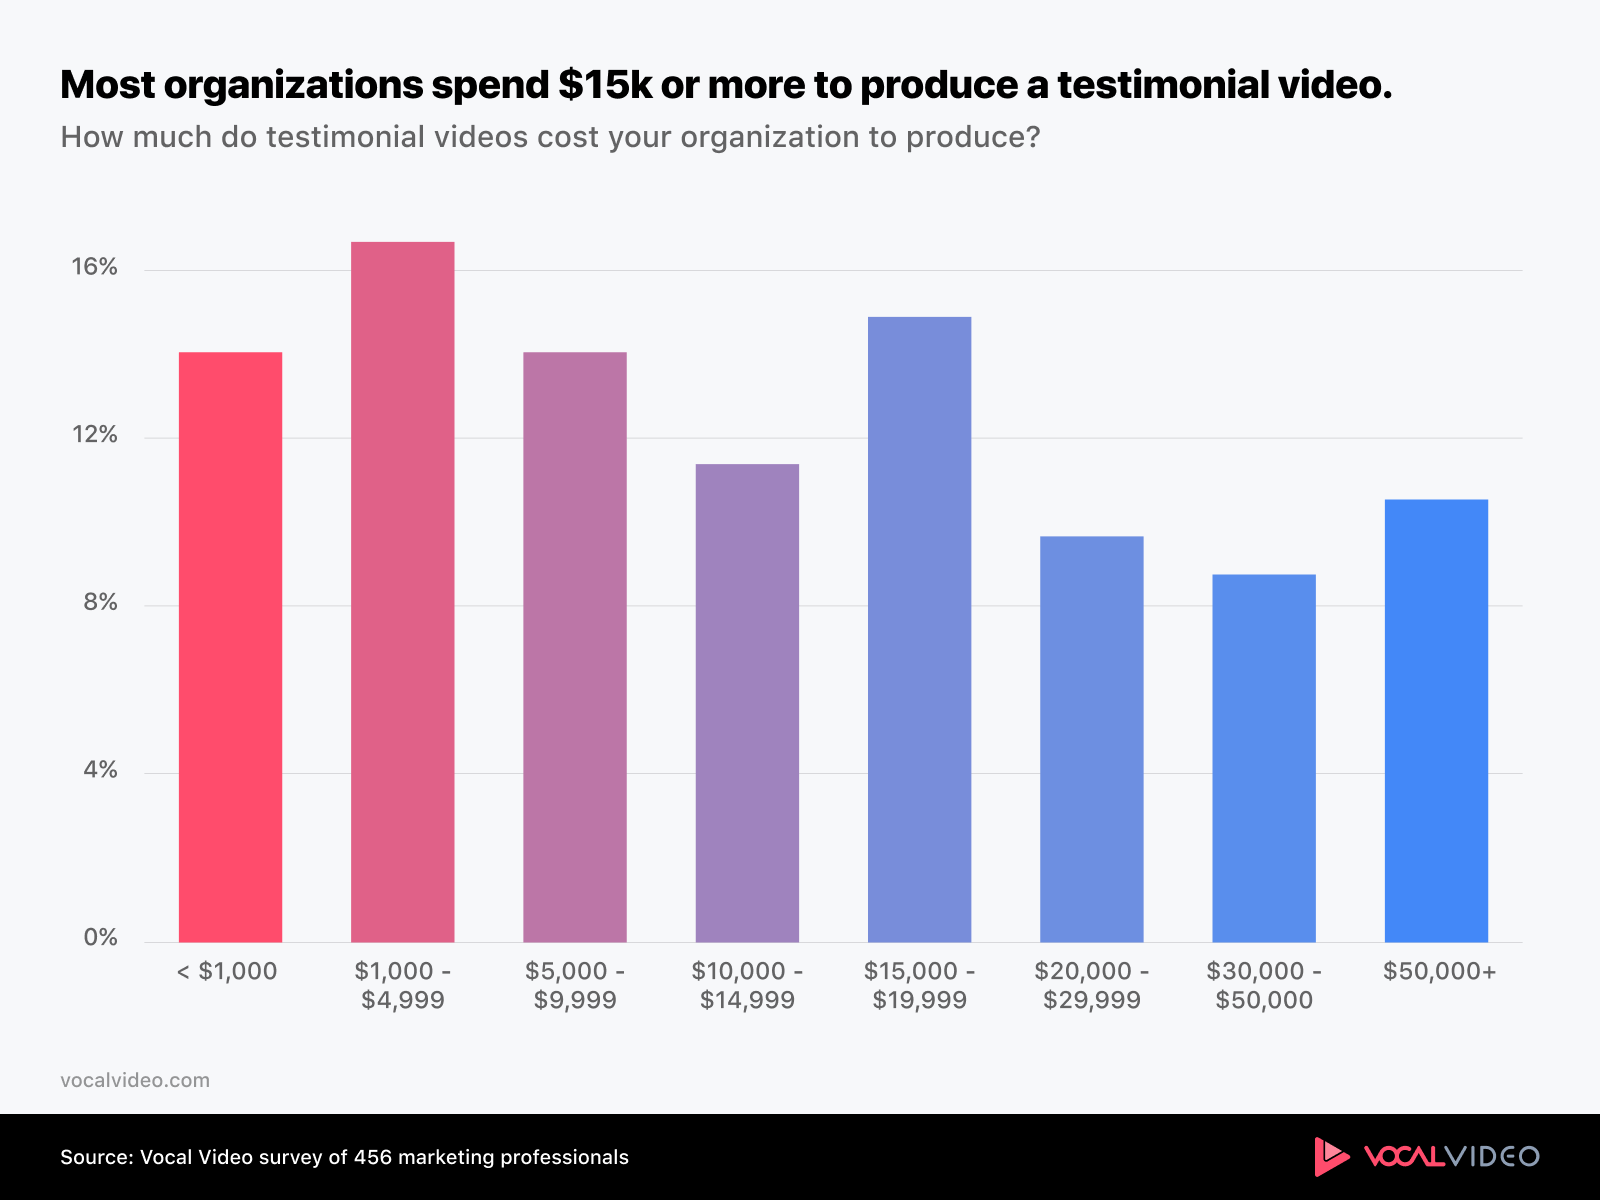 Most organizations spend 15k or more to produce testimonial videos. 